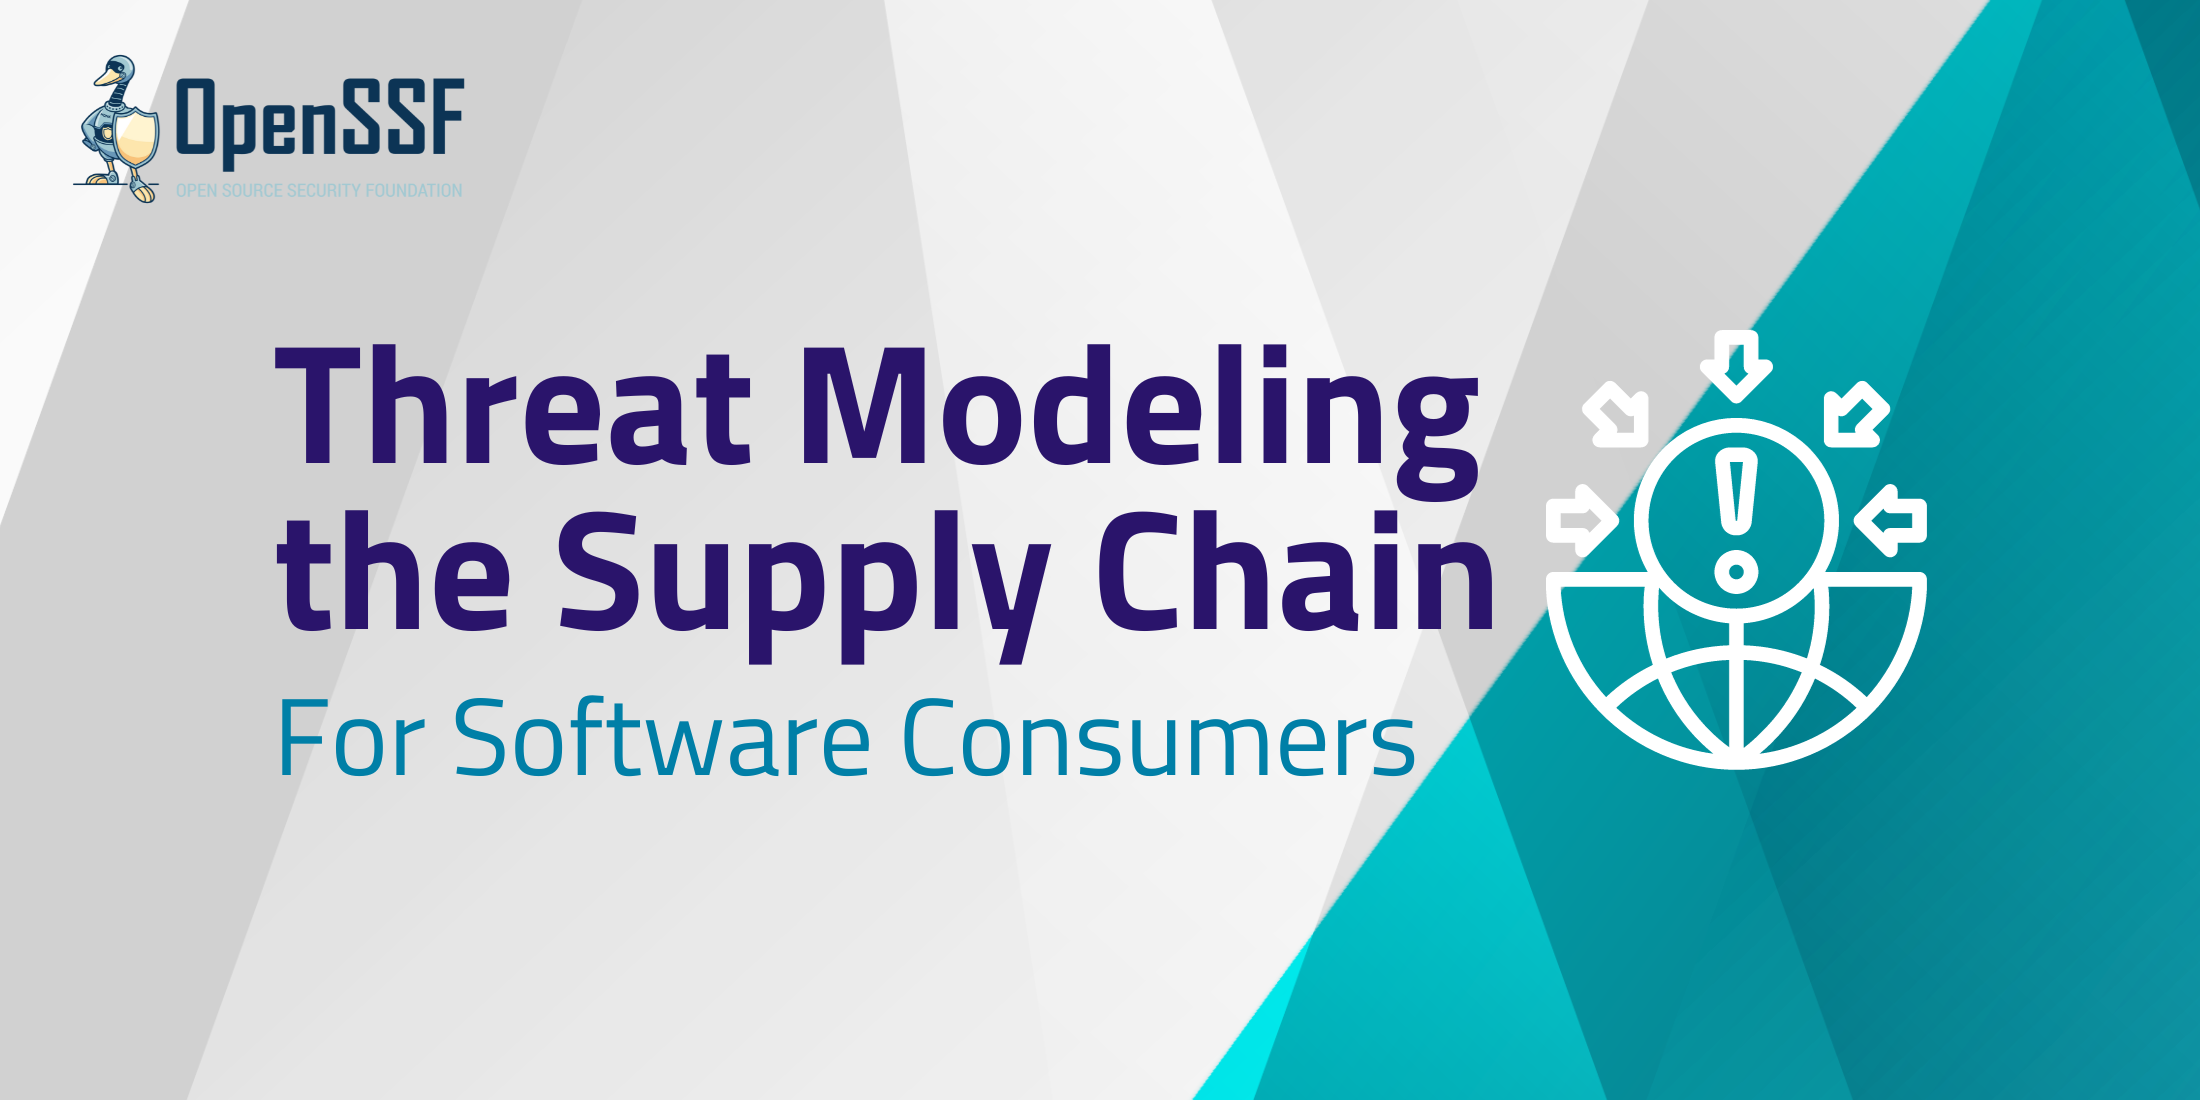 Threat Modeling the Supply Chain for Software Consumers